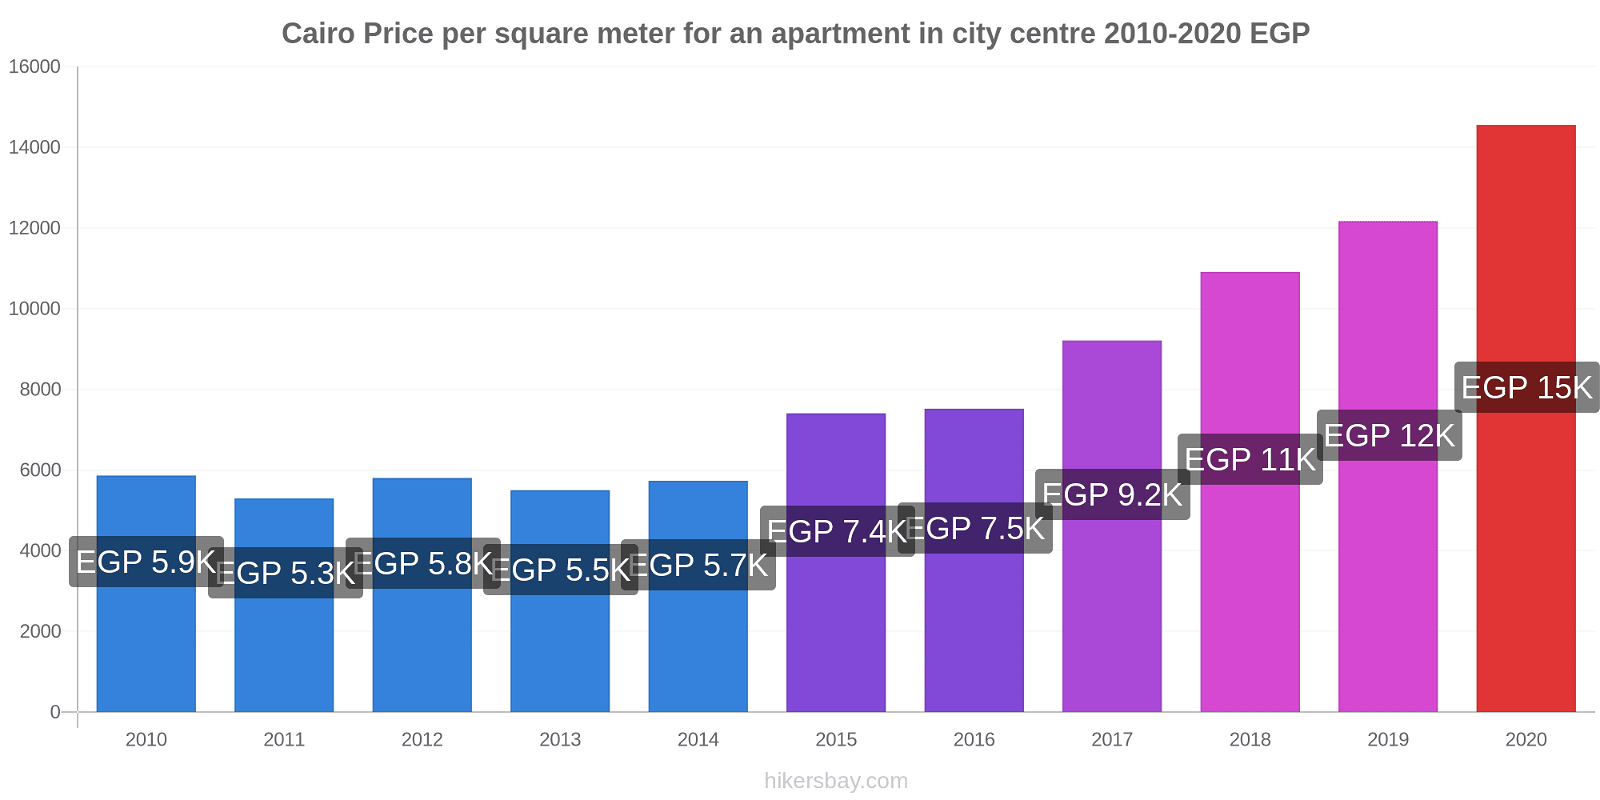 Cairo price changes Price per square meter for an apartment in city centre hikersbay.com